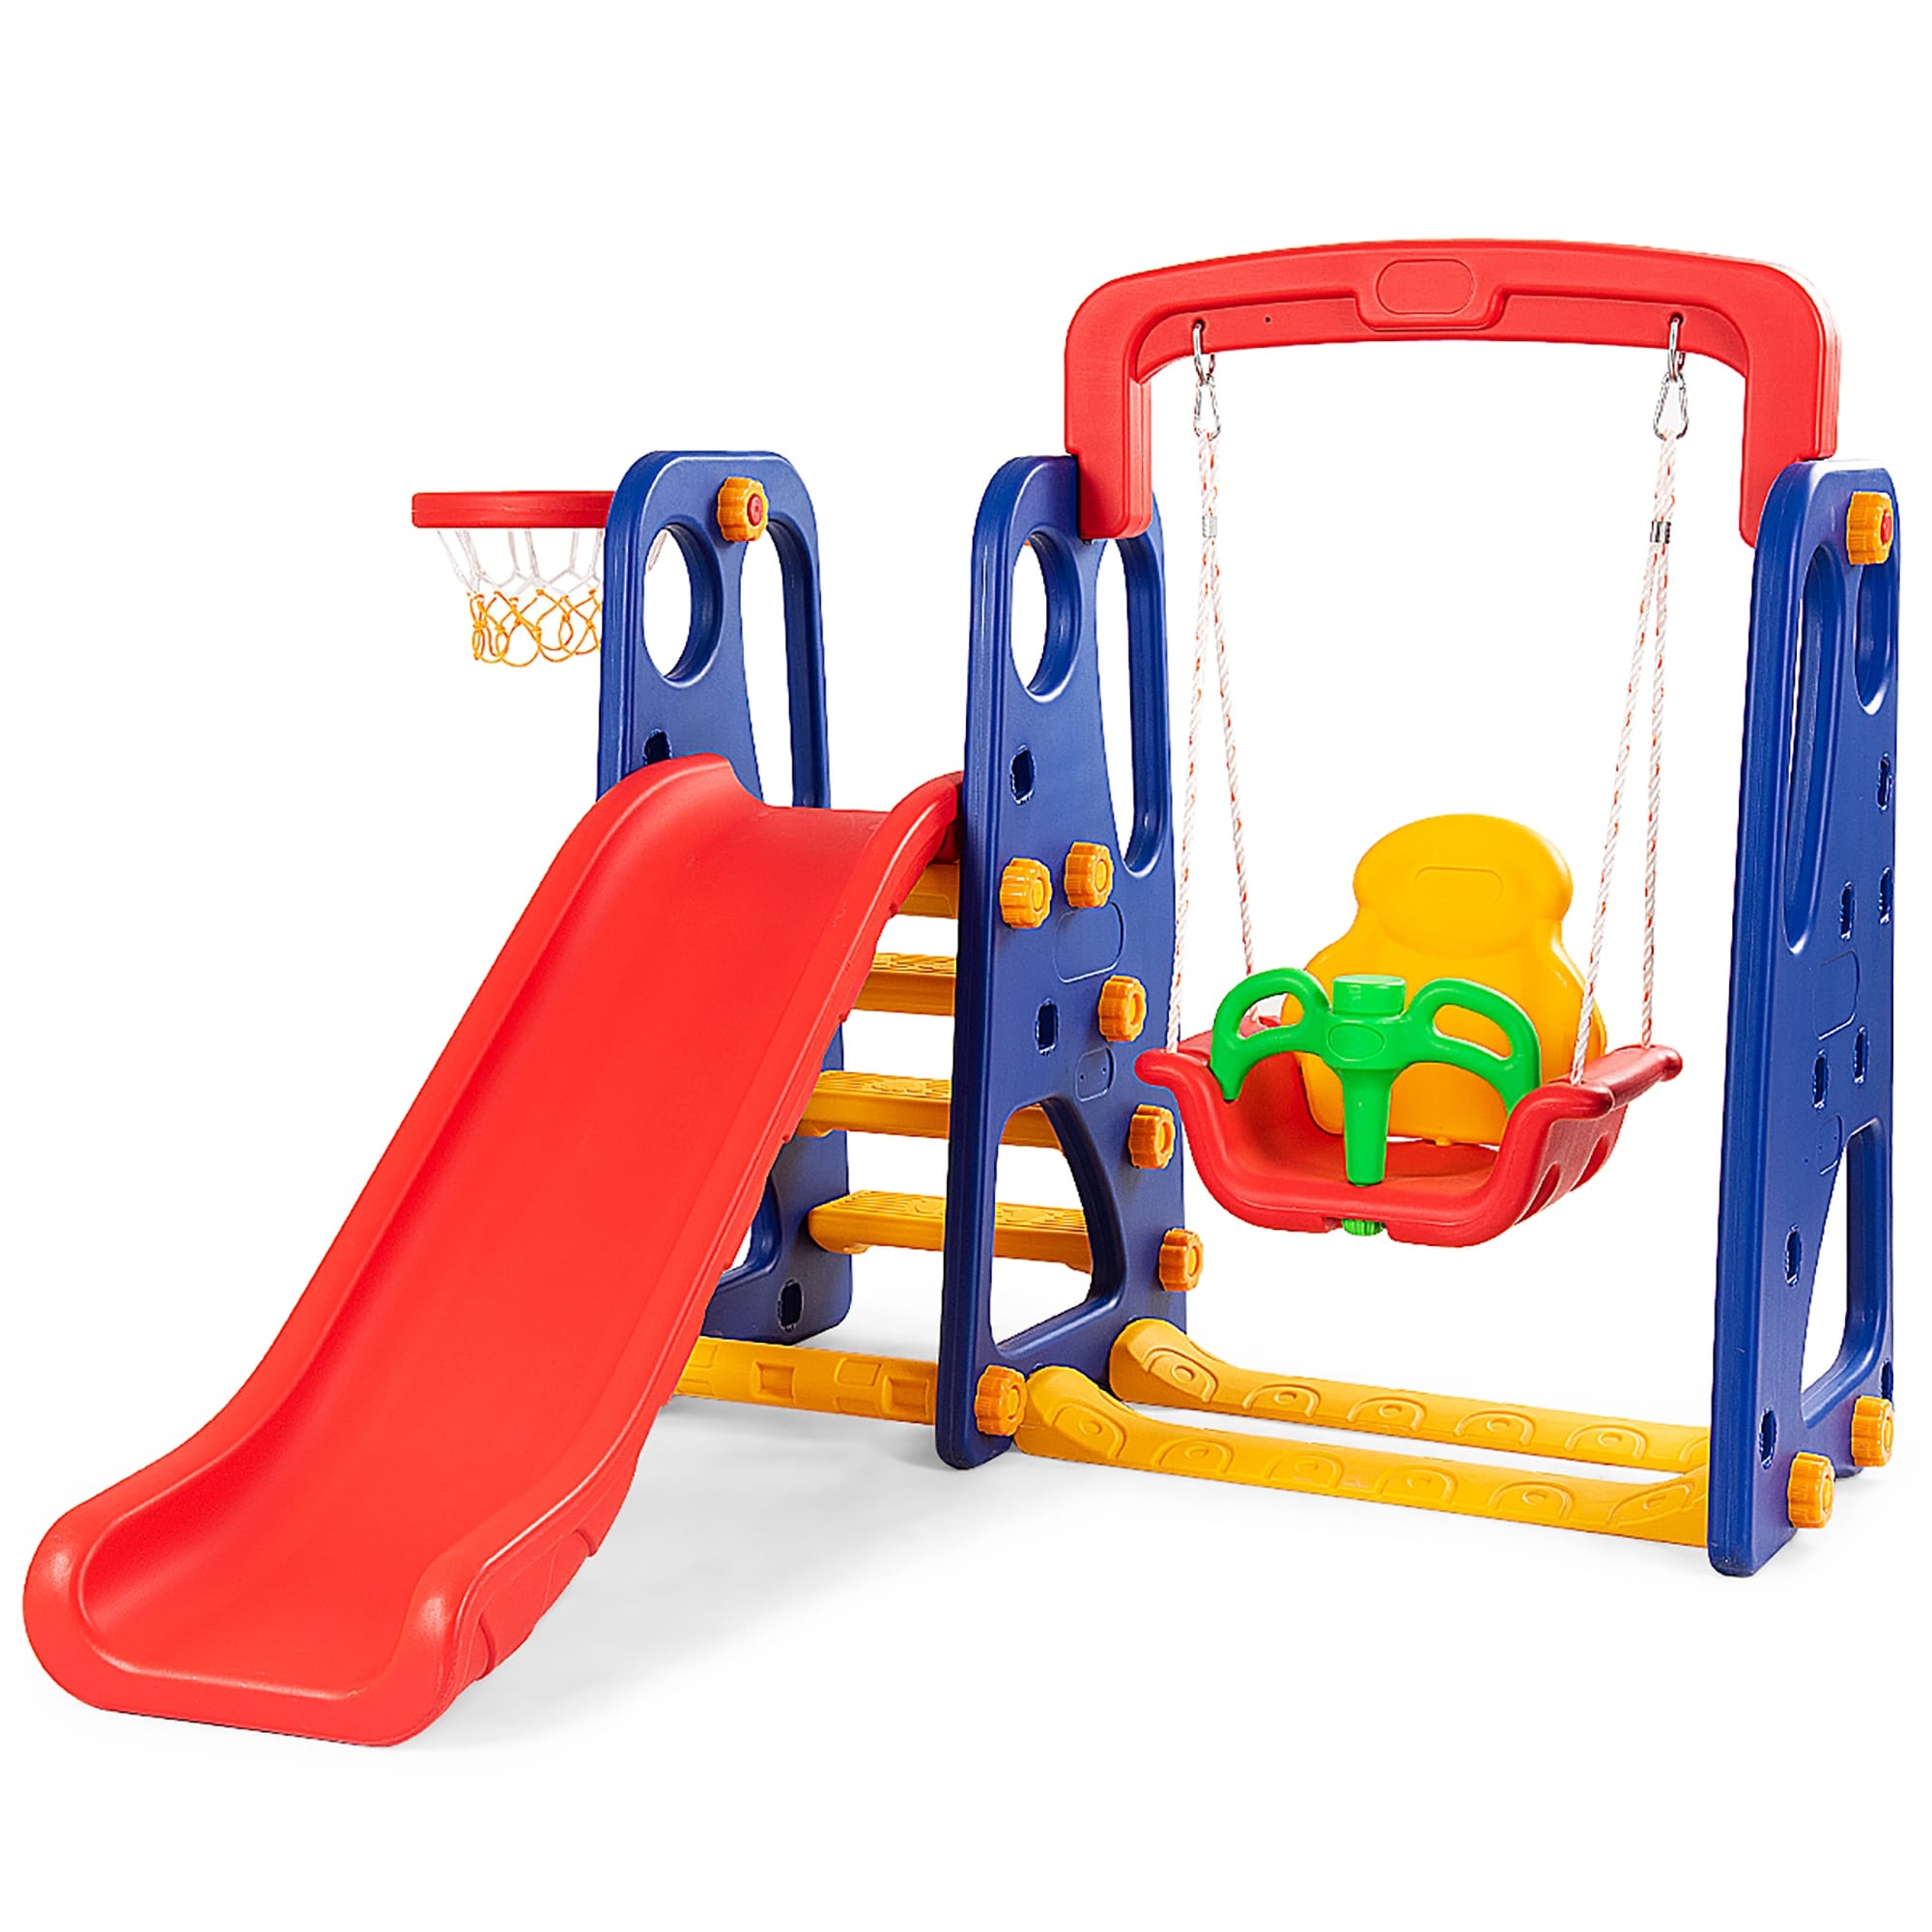 3 in 1 Toddler Climber and Swing Set Climber Slide Playset